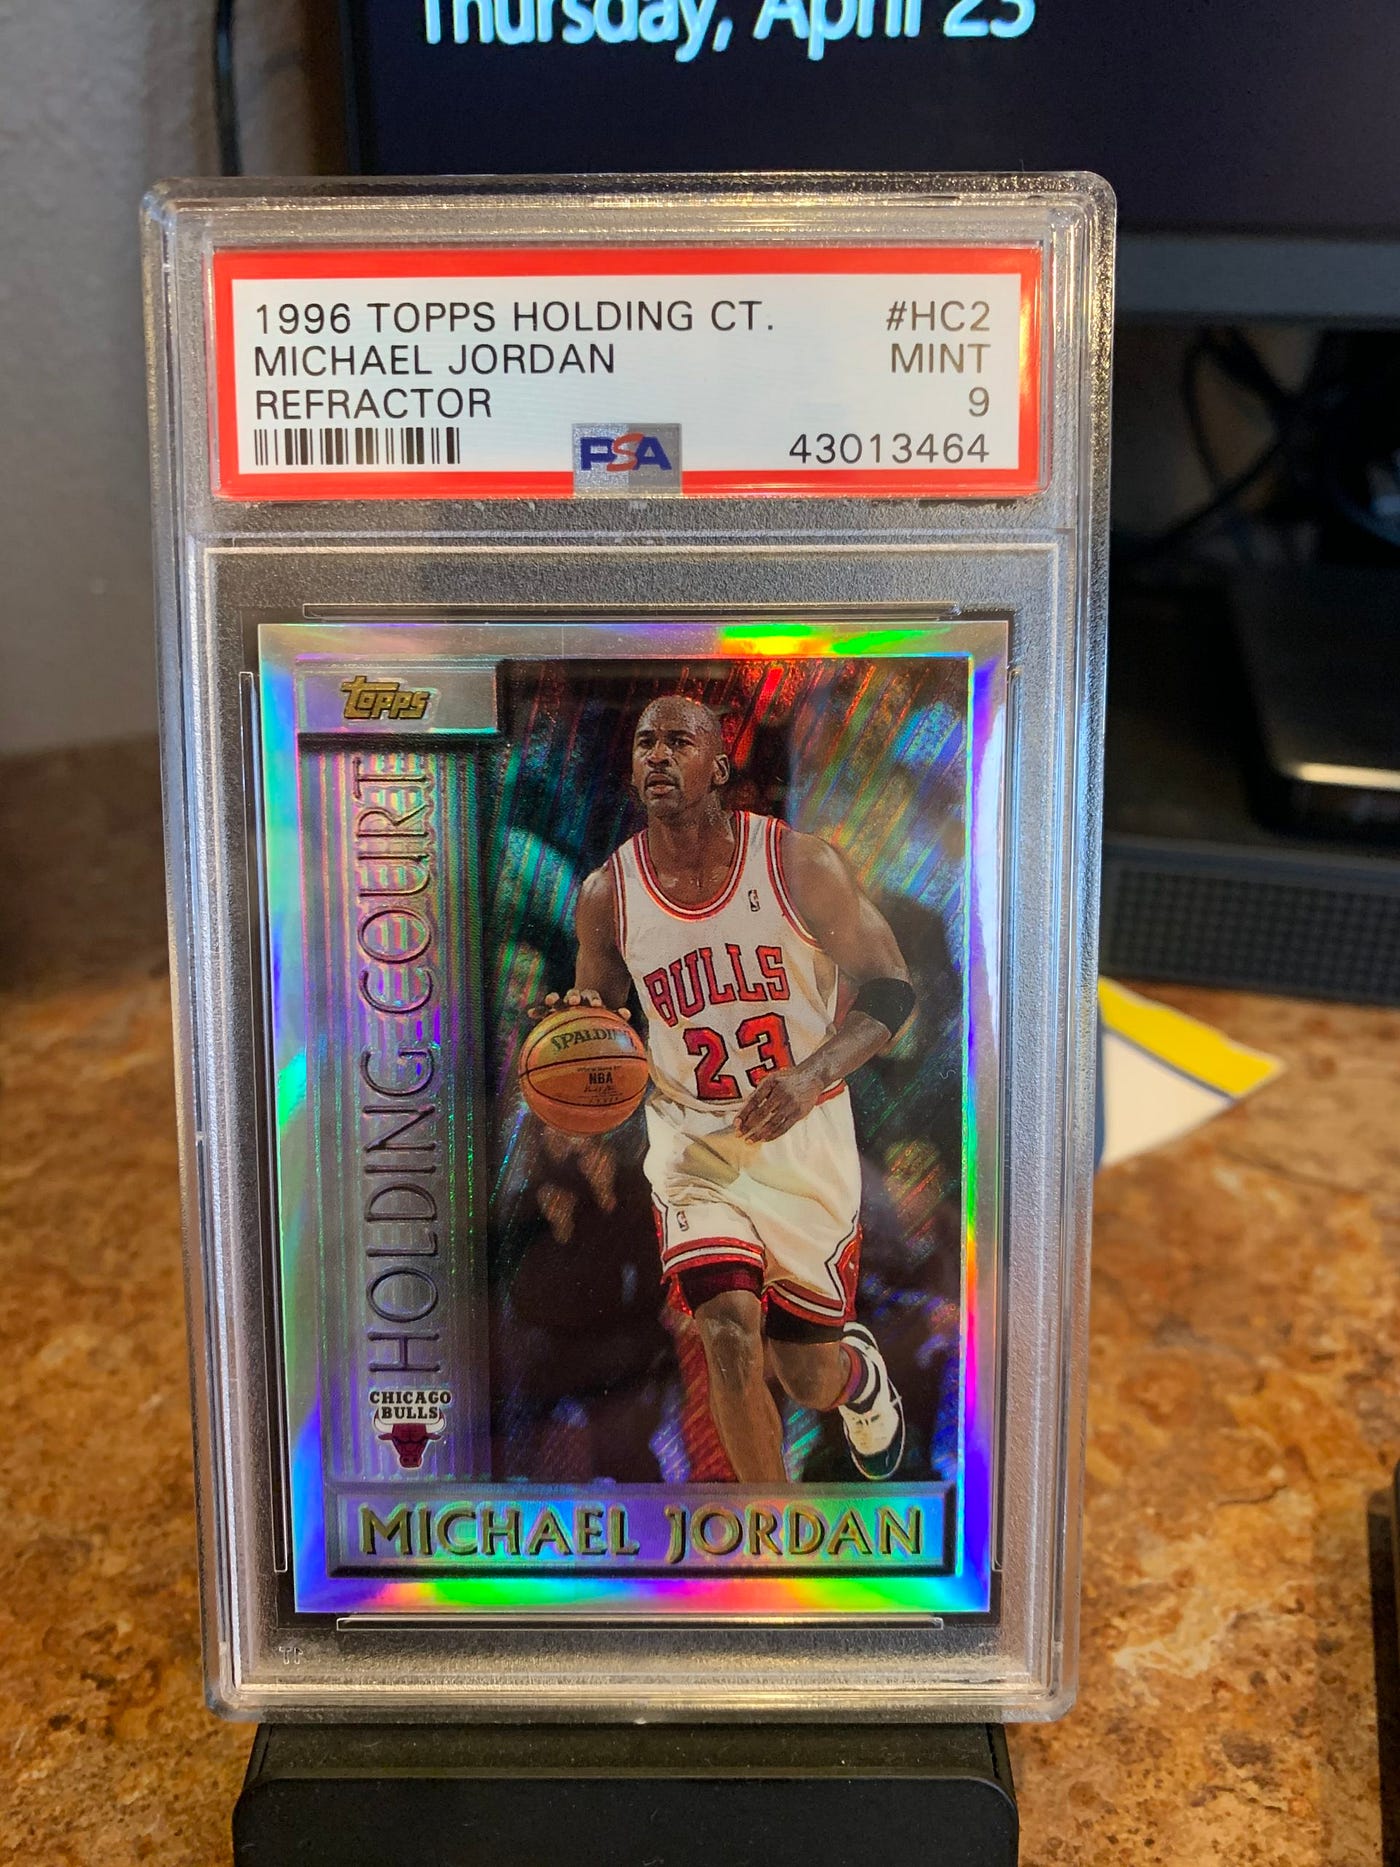 THE GUIDE TO MICHAEL JORDAN REFRACTOR BASKETBALL CARDS | The Air